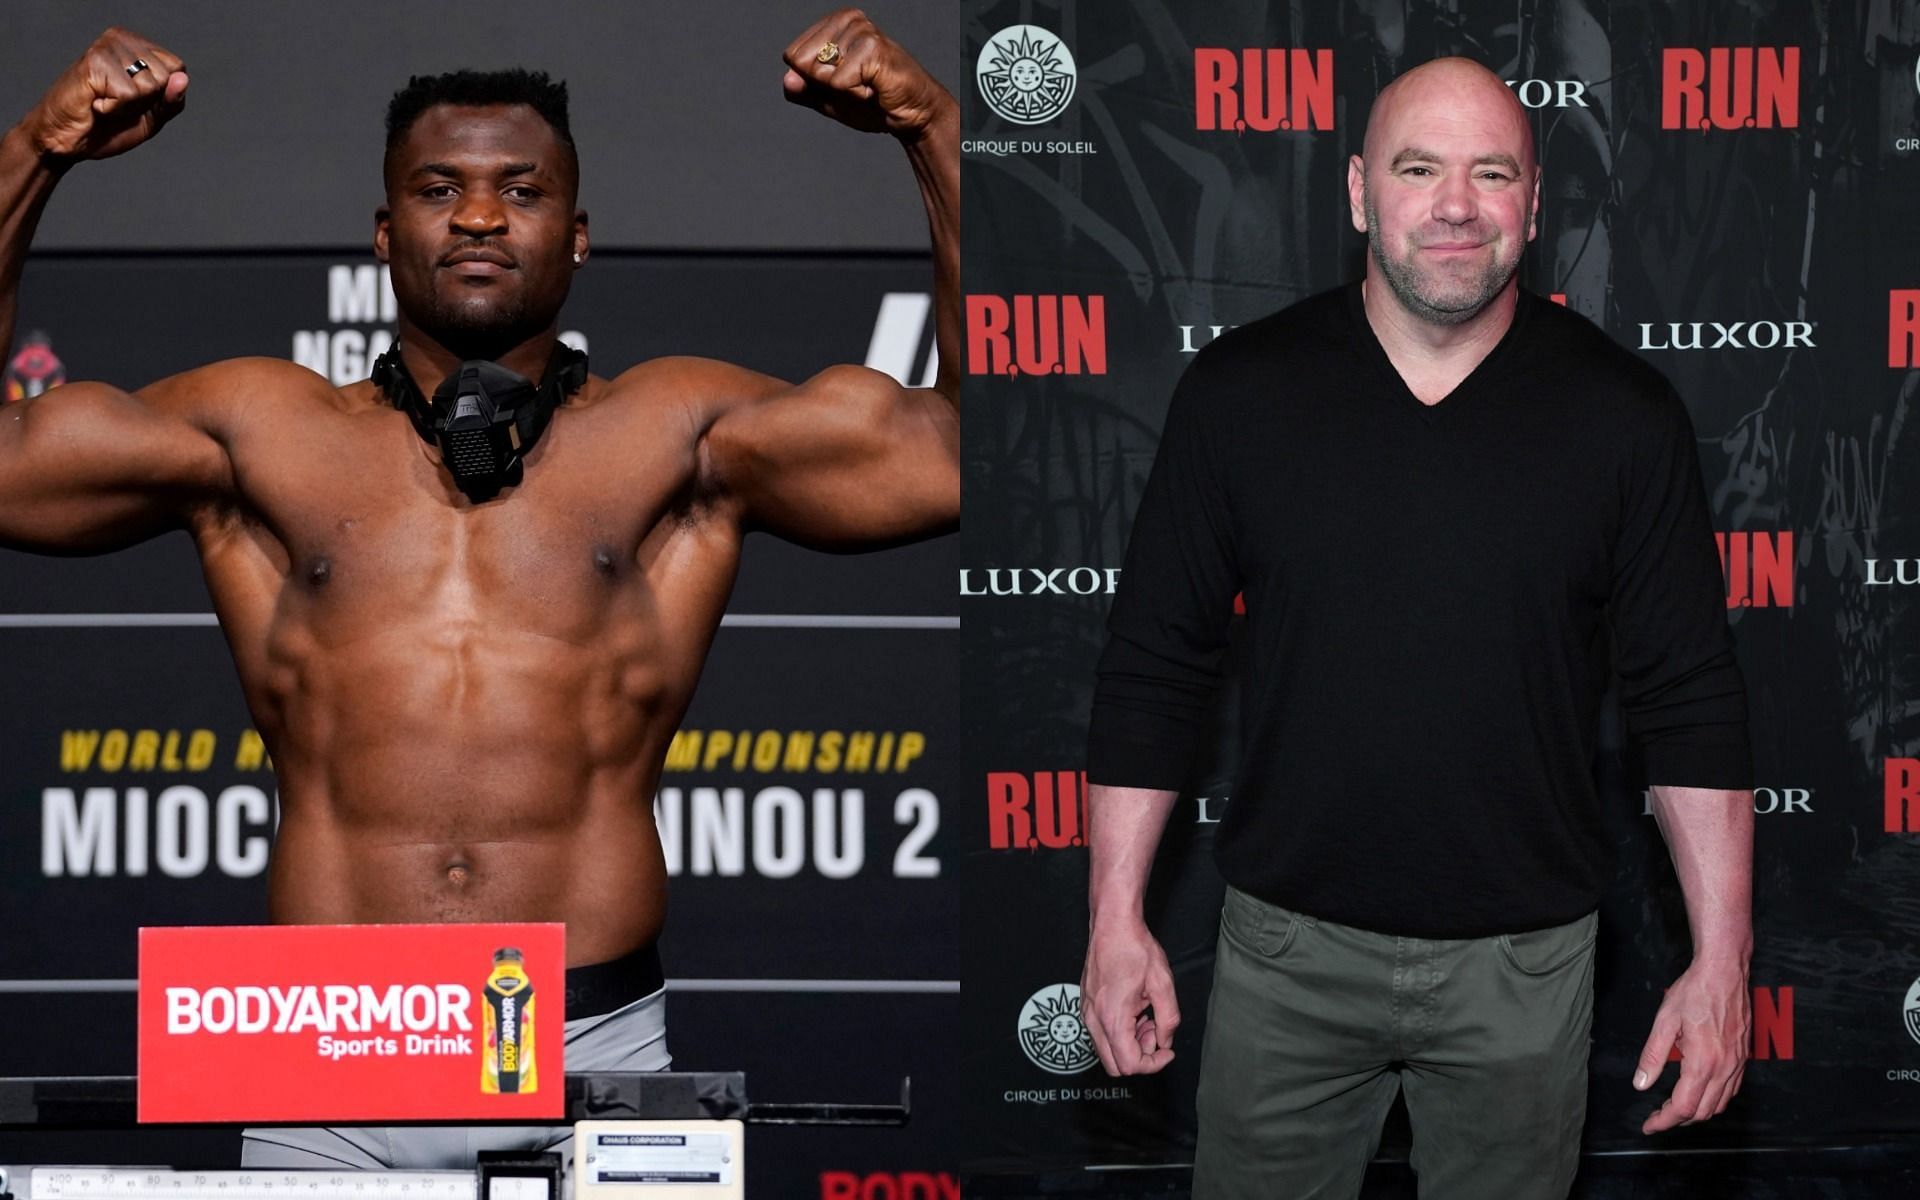 Francis Ngannou at the UFC 260 official weigh-ins (left) and Dana White attending an event (right)